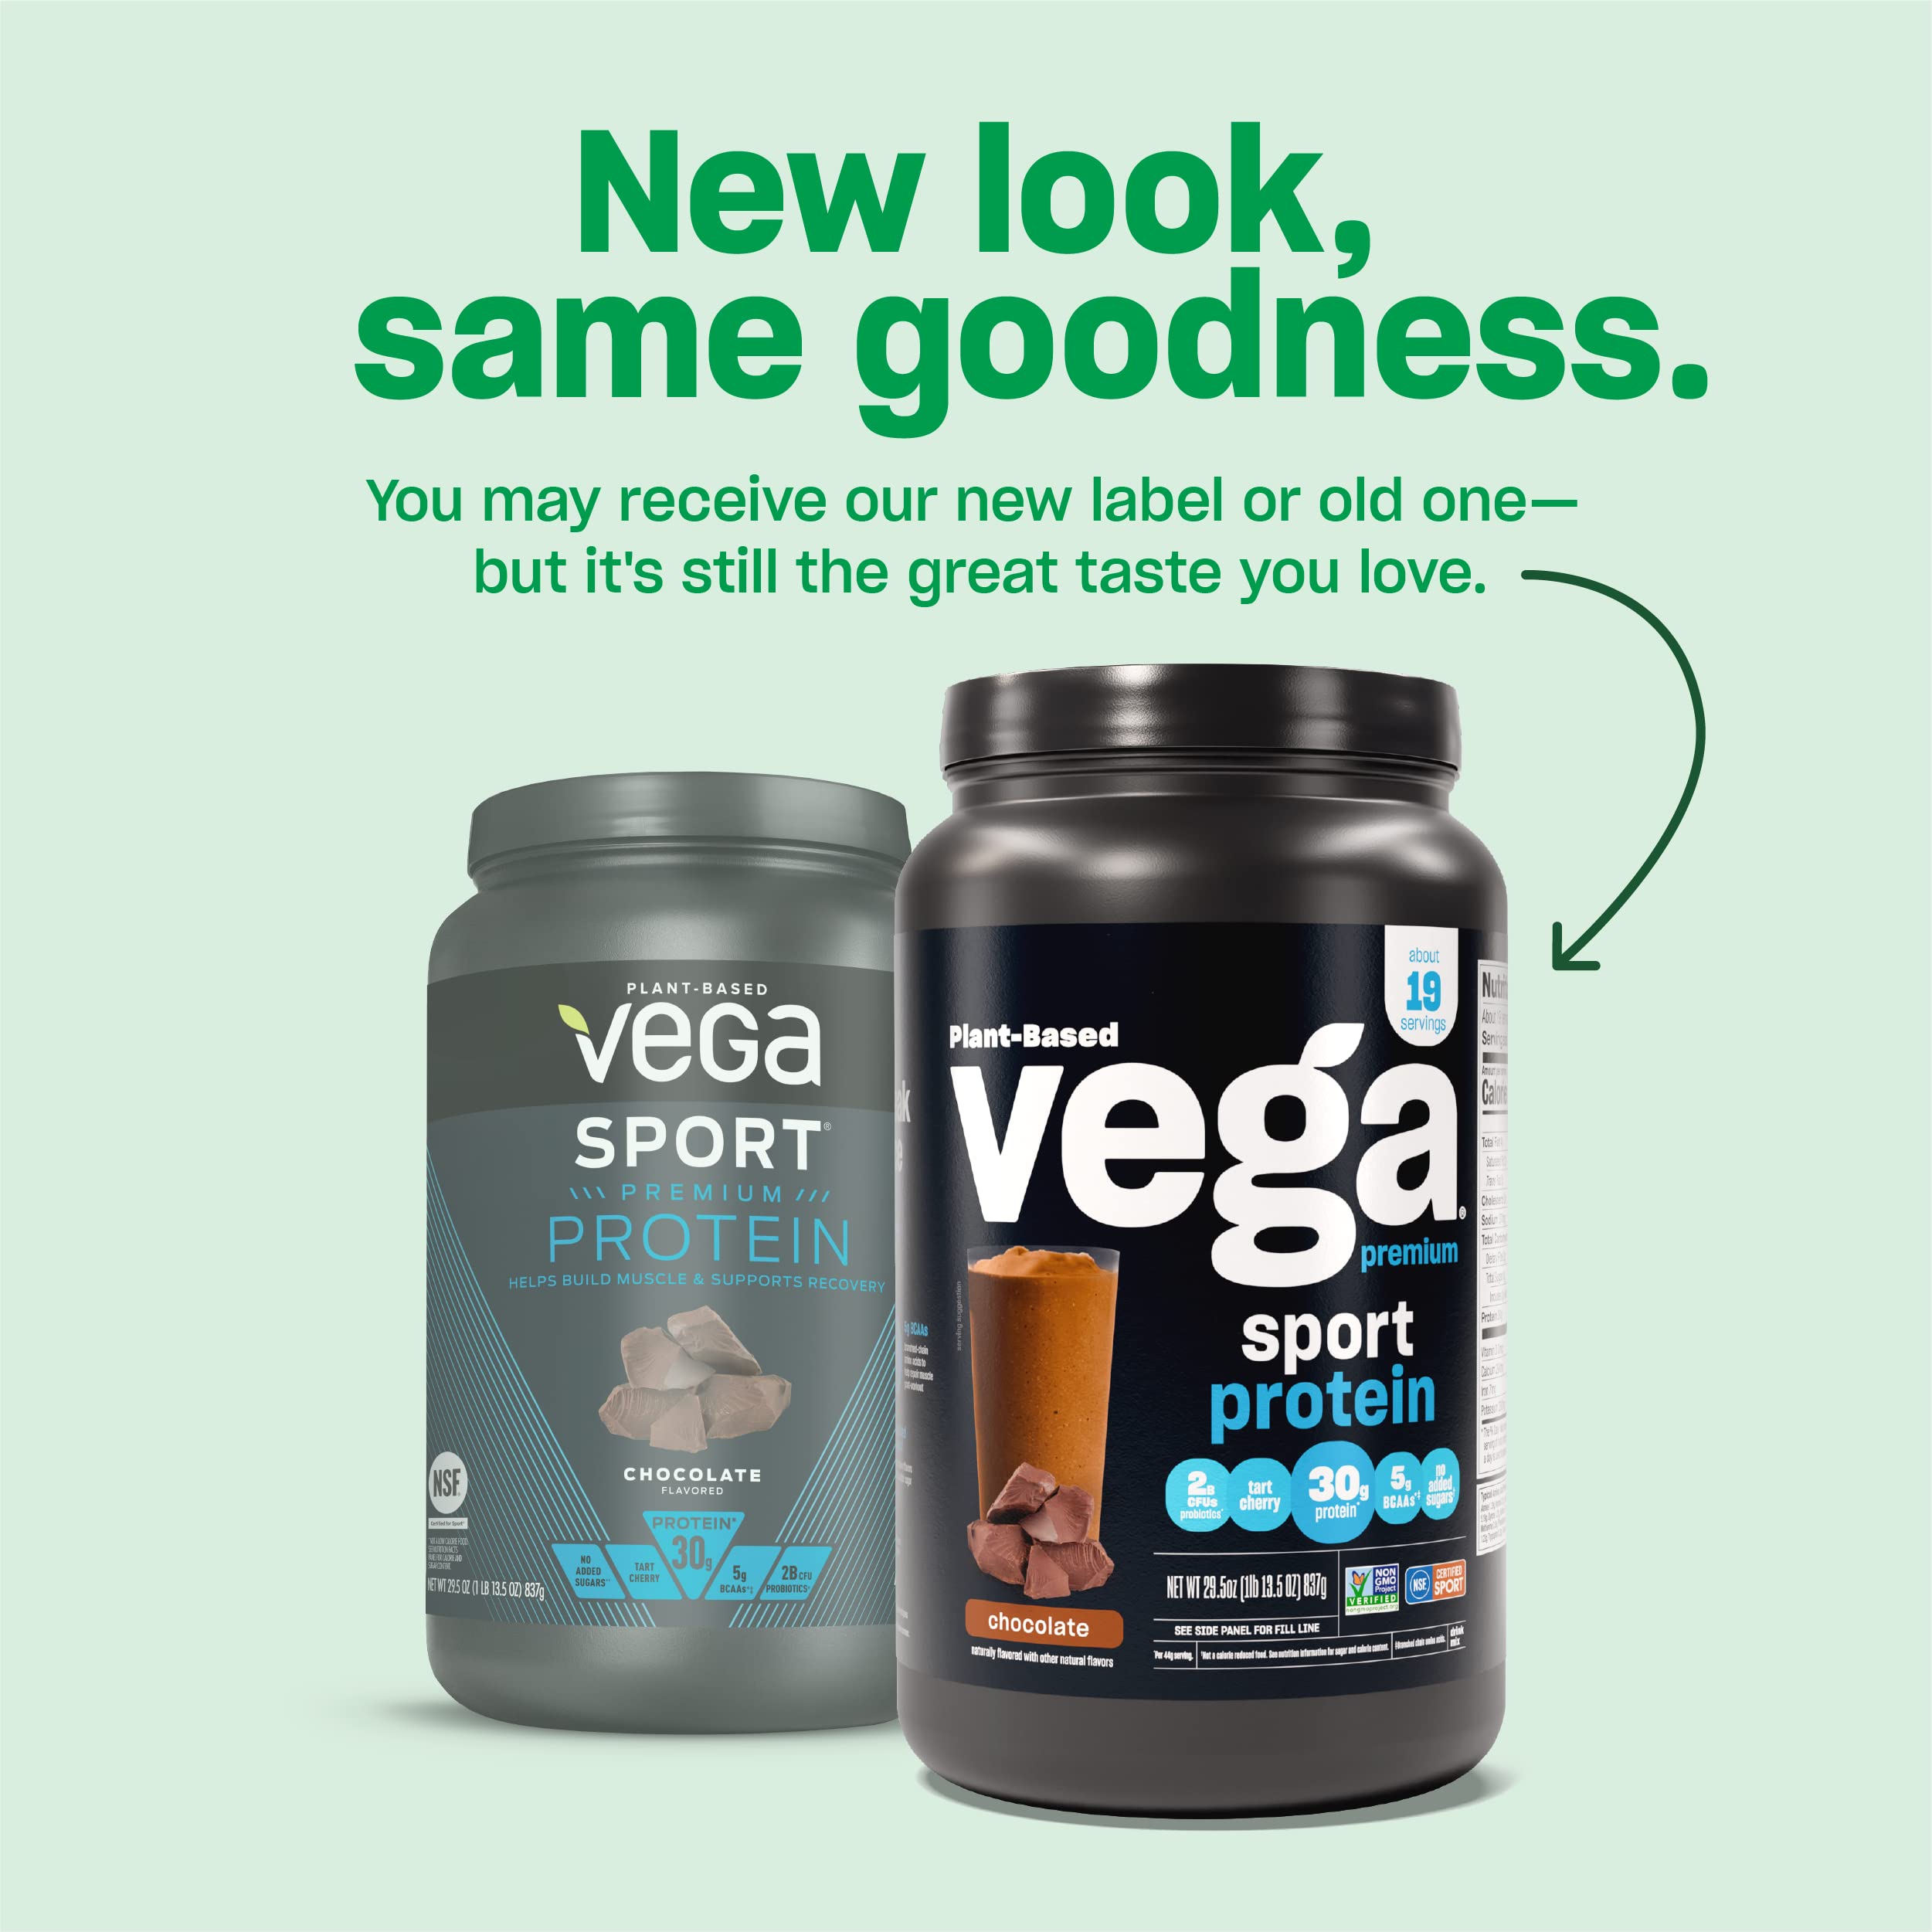 Vega Sport Premium Vegan Protein Powder, Chocolate - 30g Plant Based Protein, 5g BCAAs, Low Carb, Keto, Dairy Free, Gluten Free, Non GMO, Pea Protein for Women & Men, 4 lbs (Packaging May Vary)